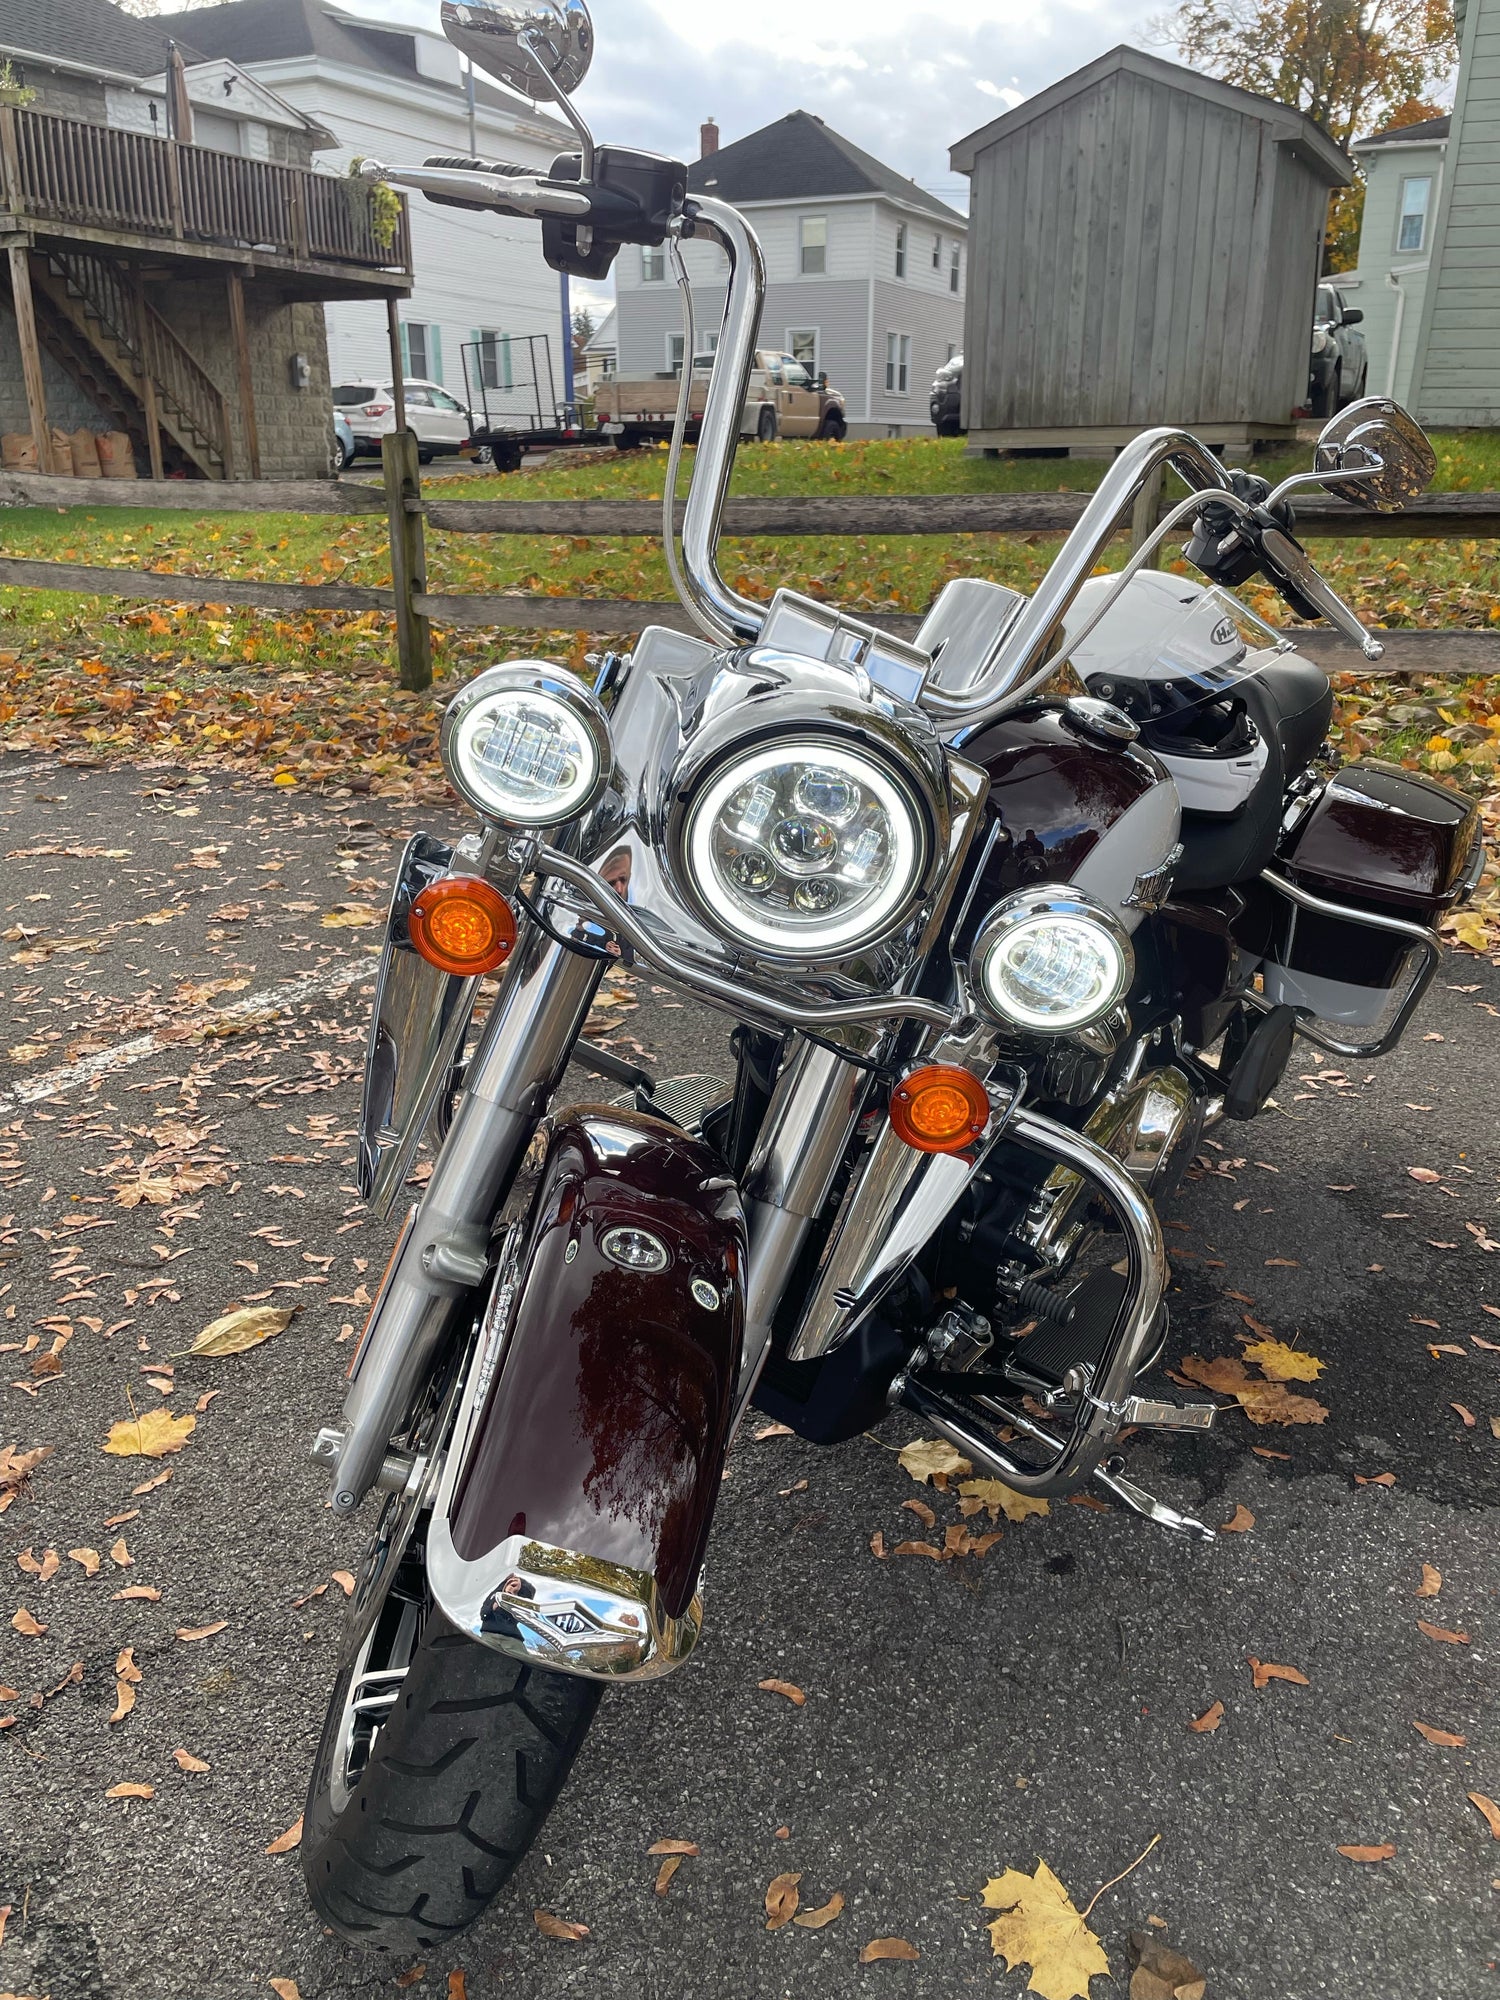 The Best LED Headlight For The Harley Davidson Road King